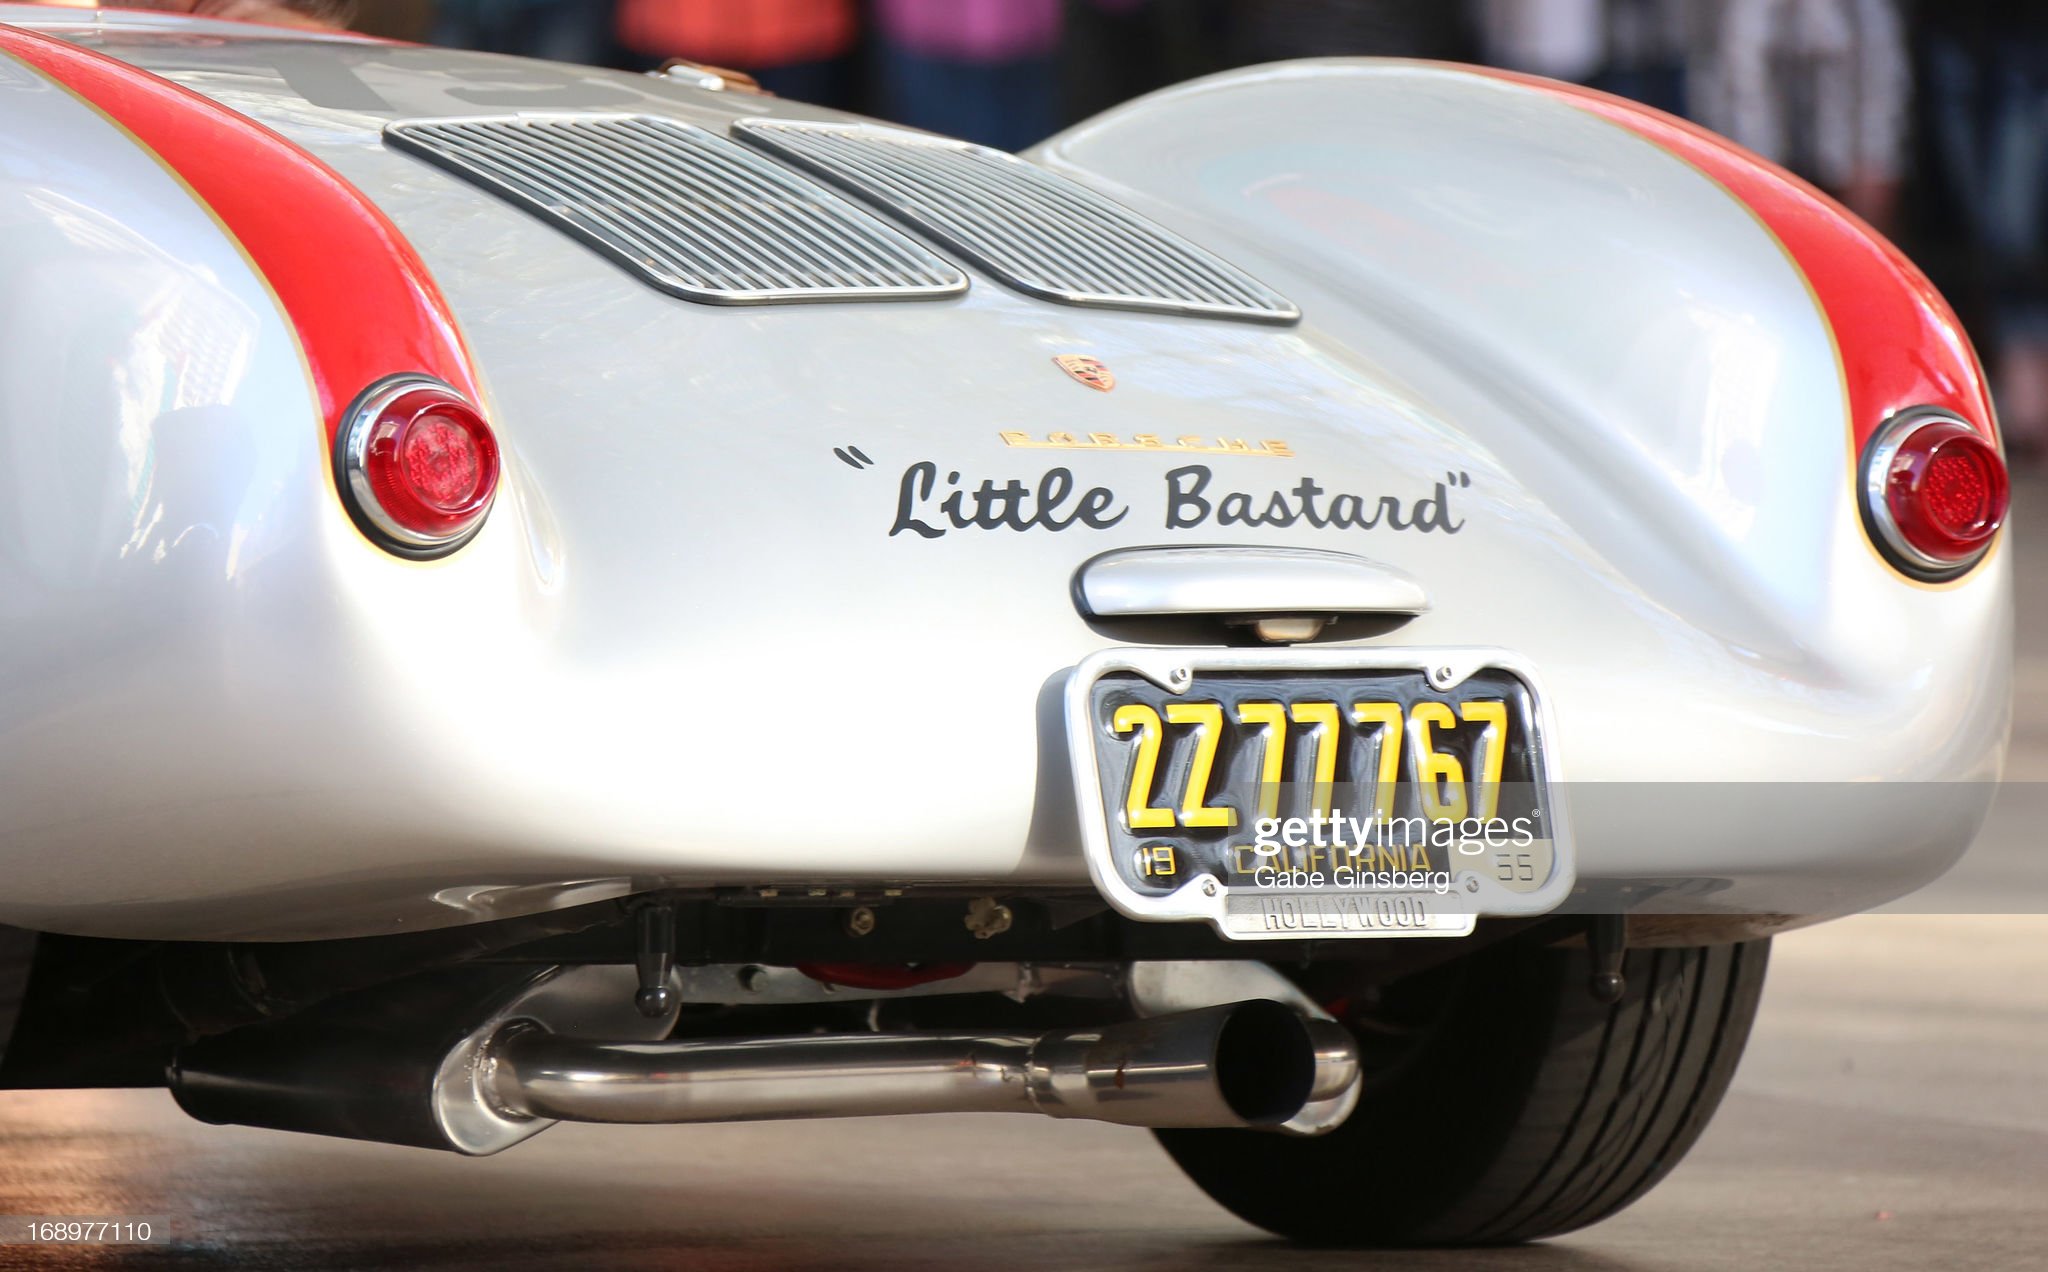 A Porsche 550 Spyder is on display at the opening ceremony of Las Vegas Car Stars at the Fremont Street Experience on May 17, 2013 in Las Vegas, Nevada. 